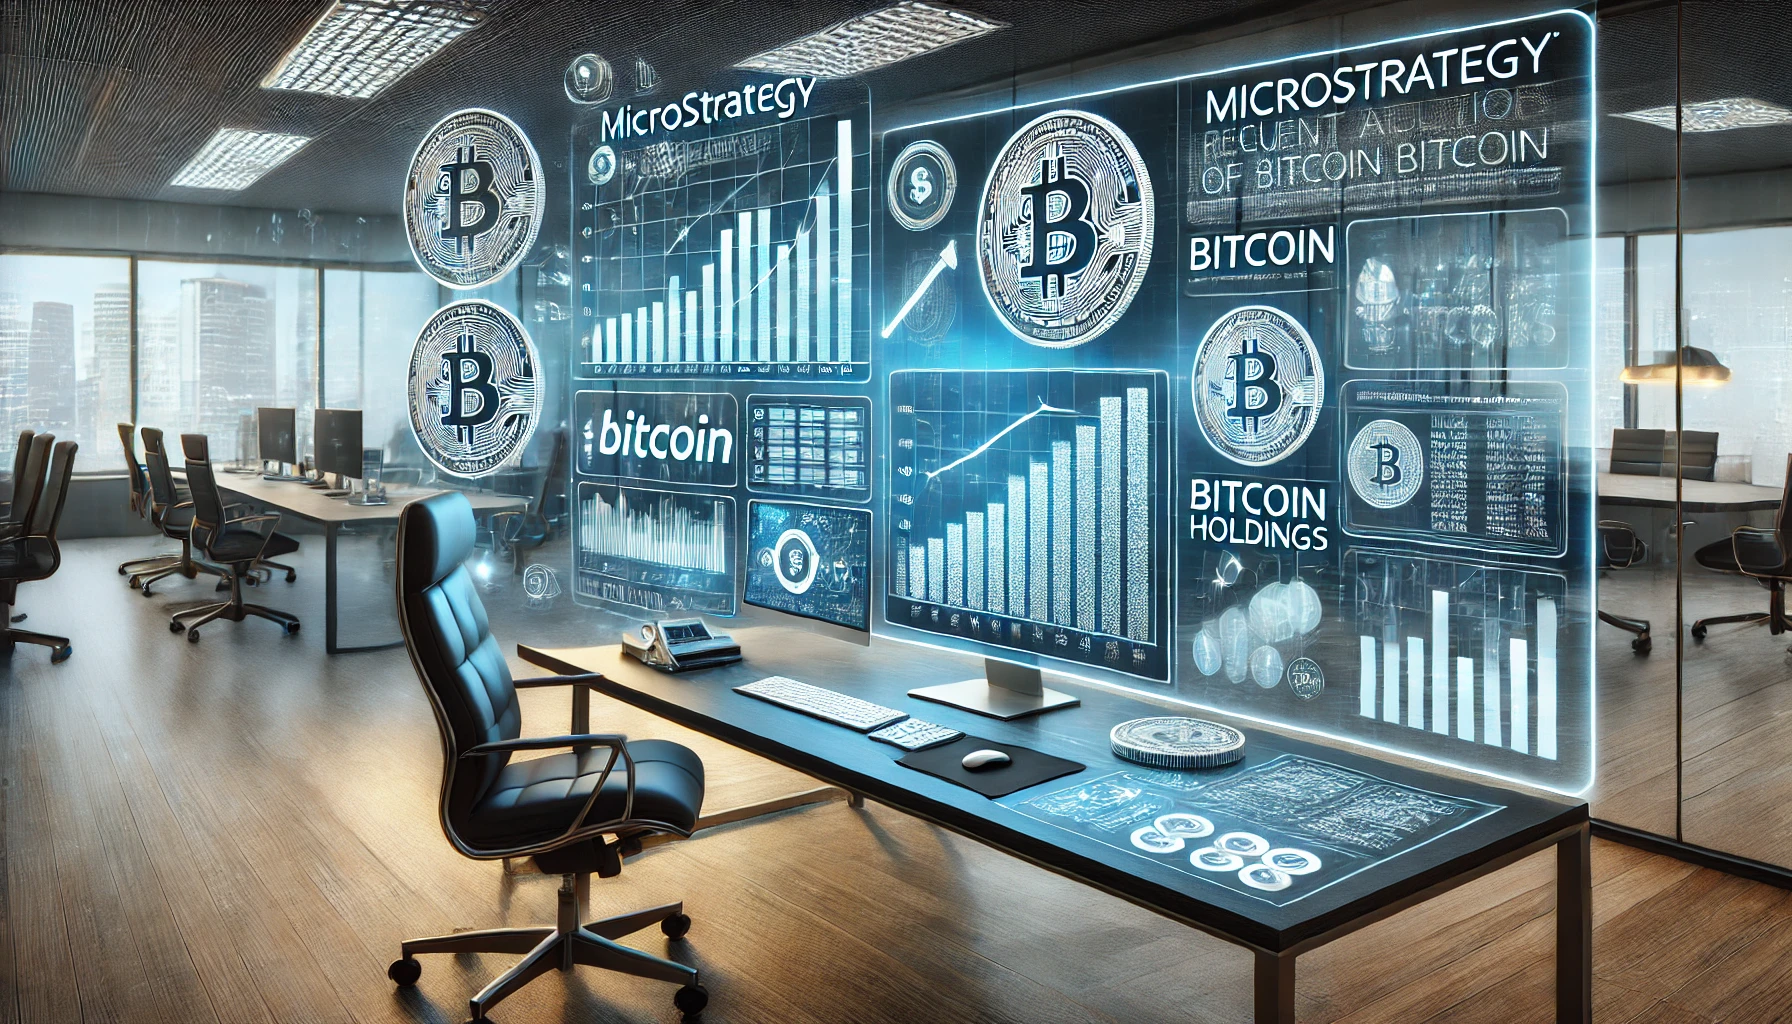 MicroStrategy Expands Bitcoin Holdings with $786M Purchase of 11.9K BTC
